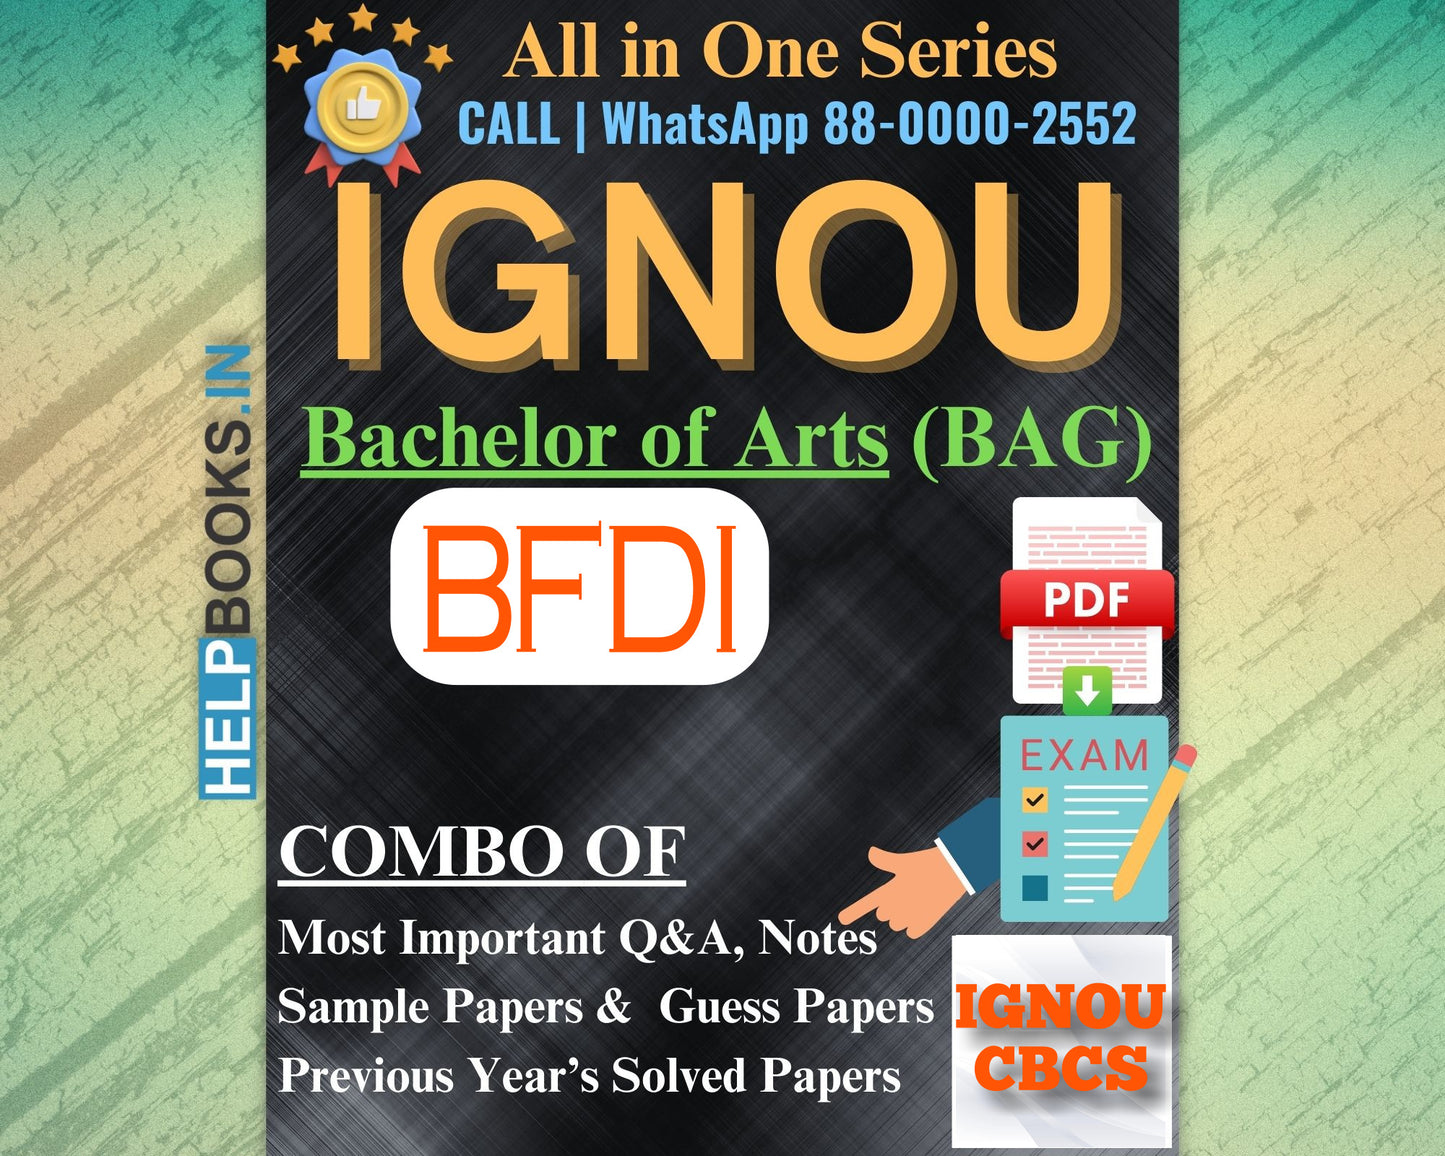 IGNOU BAG Online Study Package: Bachelor of Arts (BA) - Previous Years Solved Papers, Q&A, Exam Notes, Sample Papers, Guess Papers-BFDI073